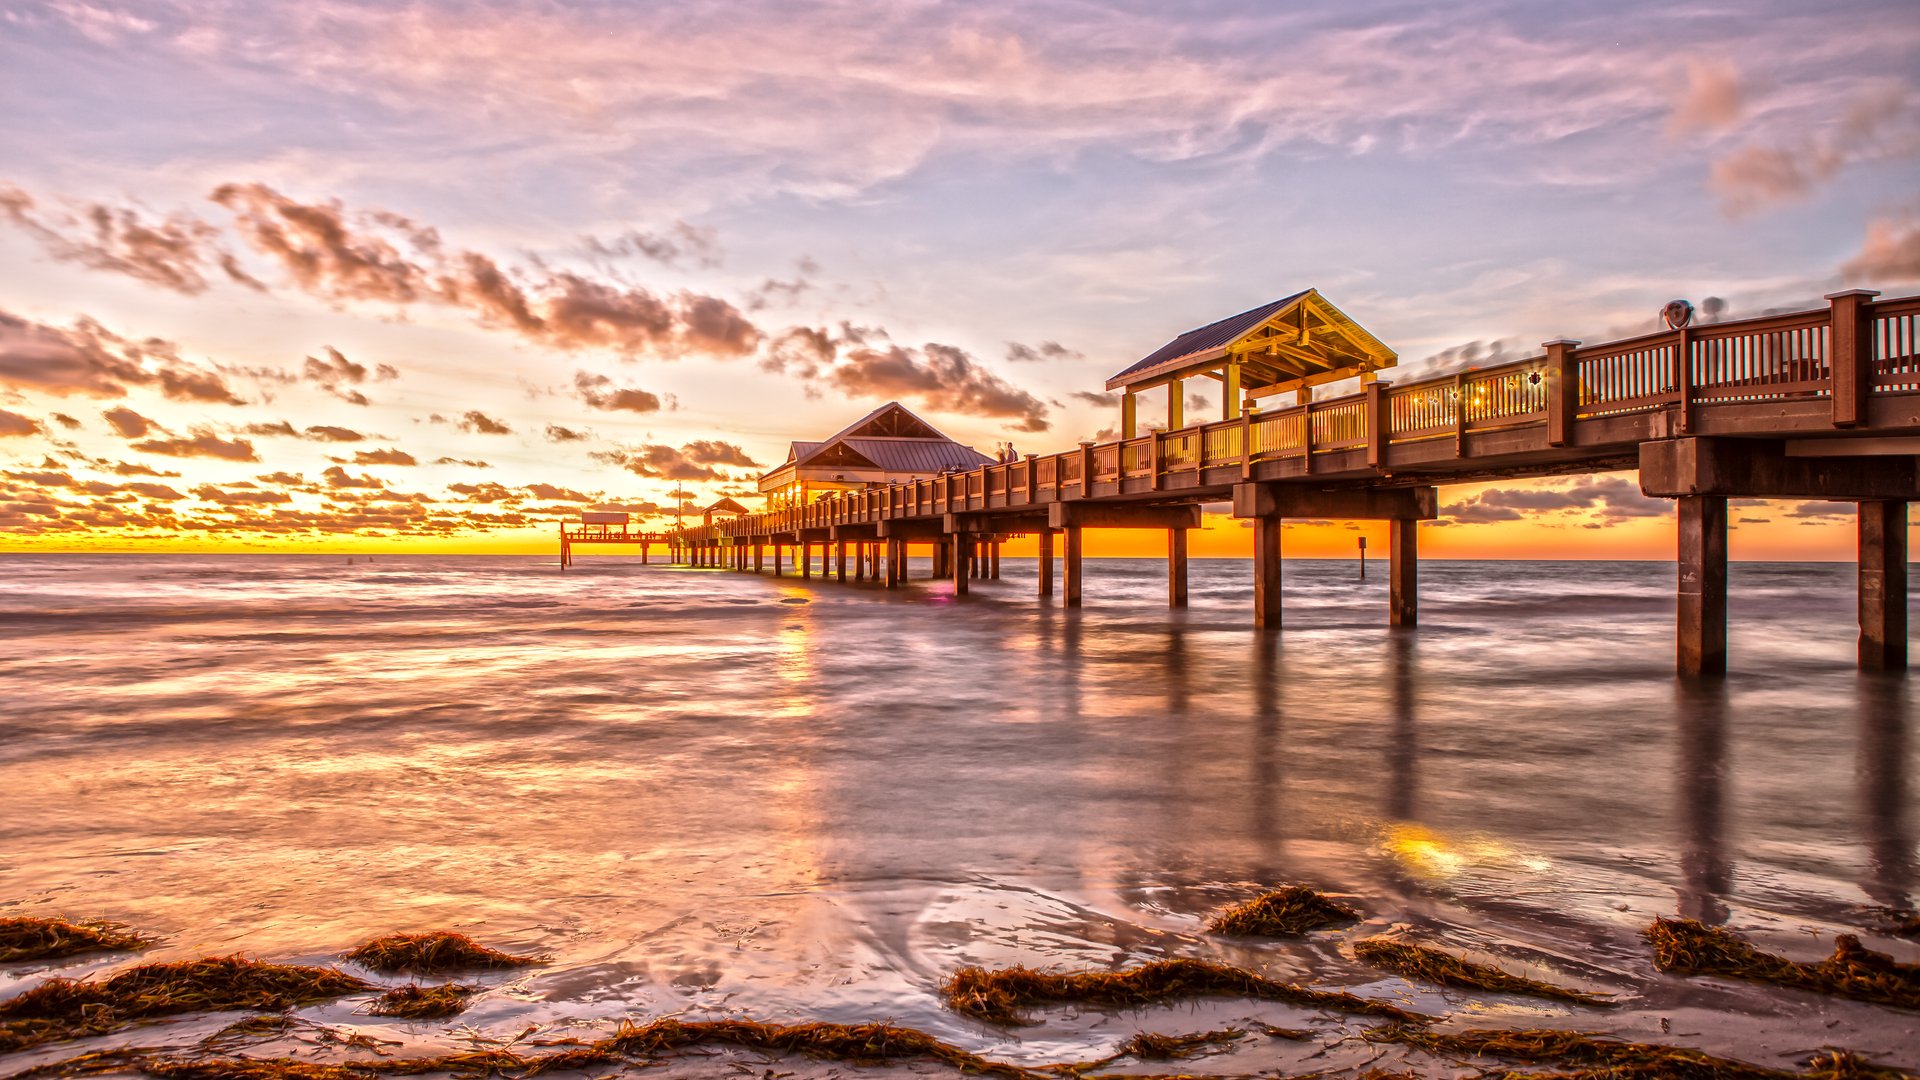 The 6 Best Beach Cities To Retire on $2,600 a Month